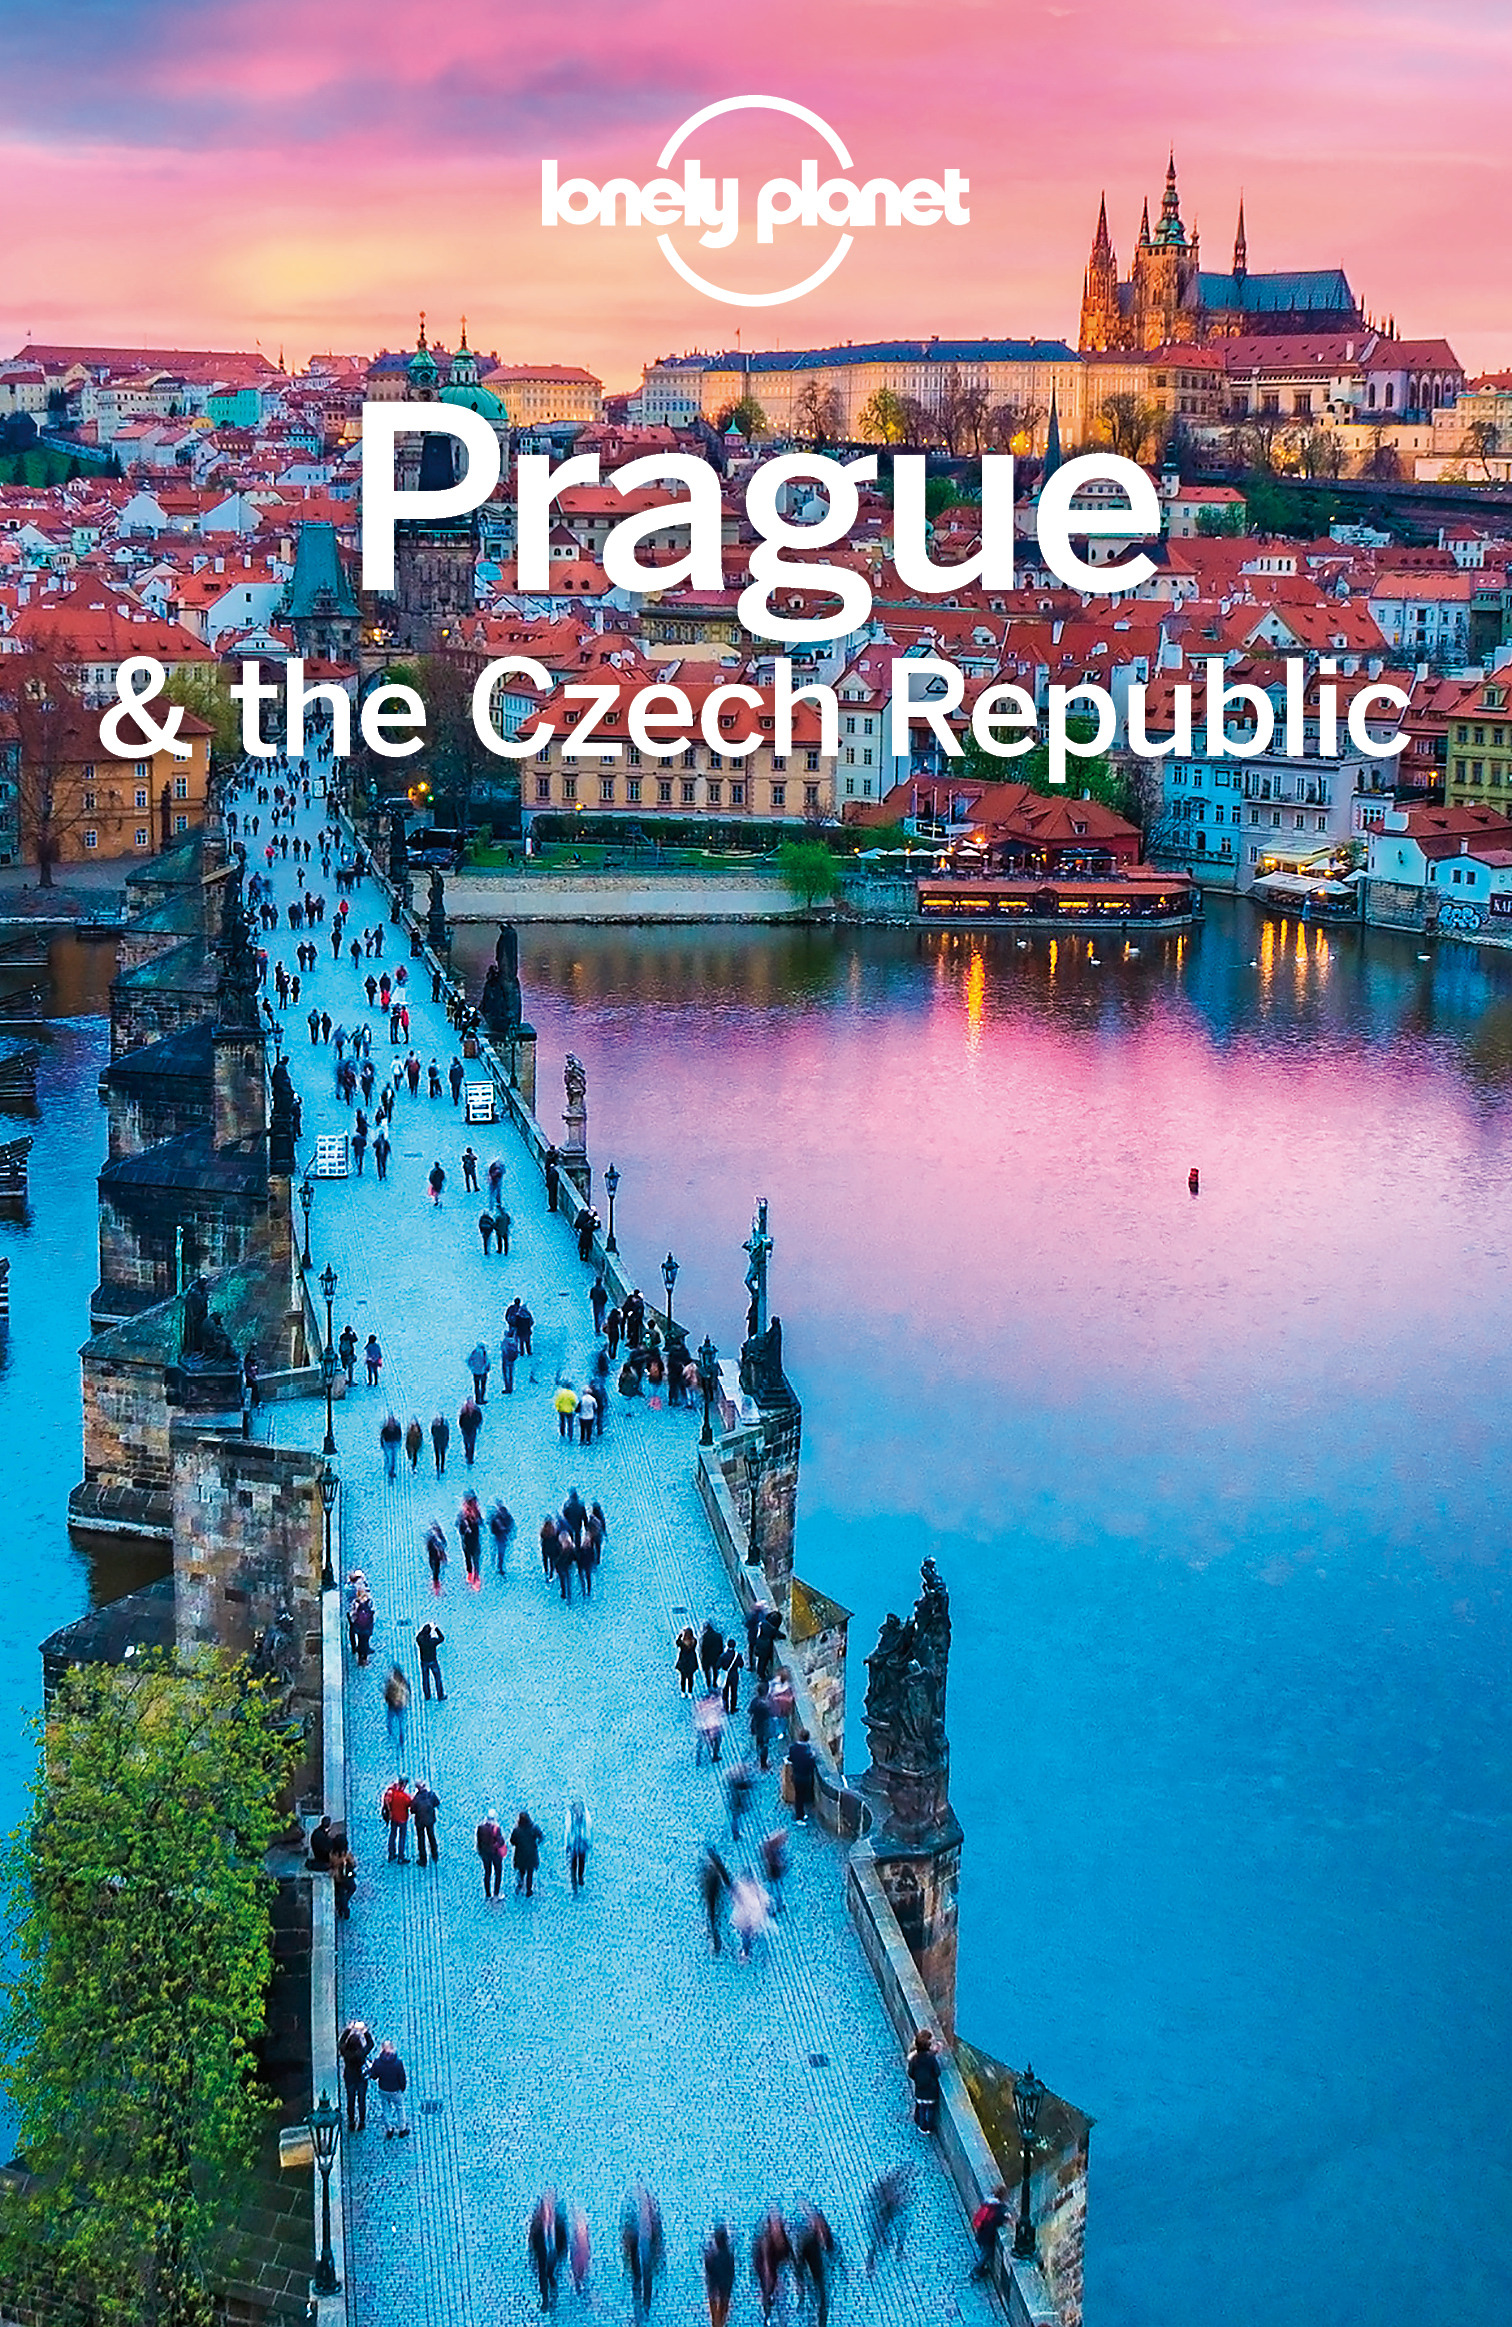 Planet, Lonely - Lonely Planet Prague & the Czech Republic, ebook